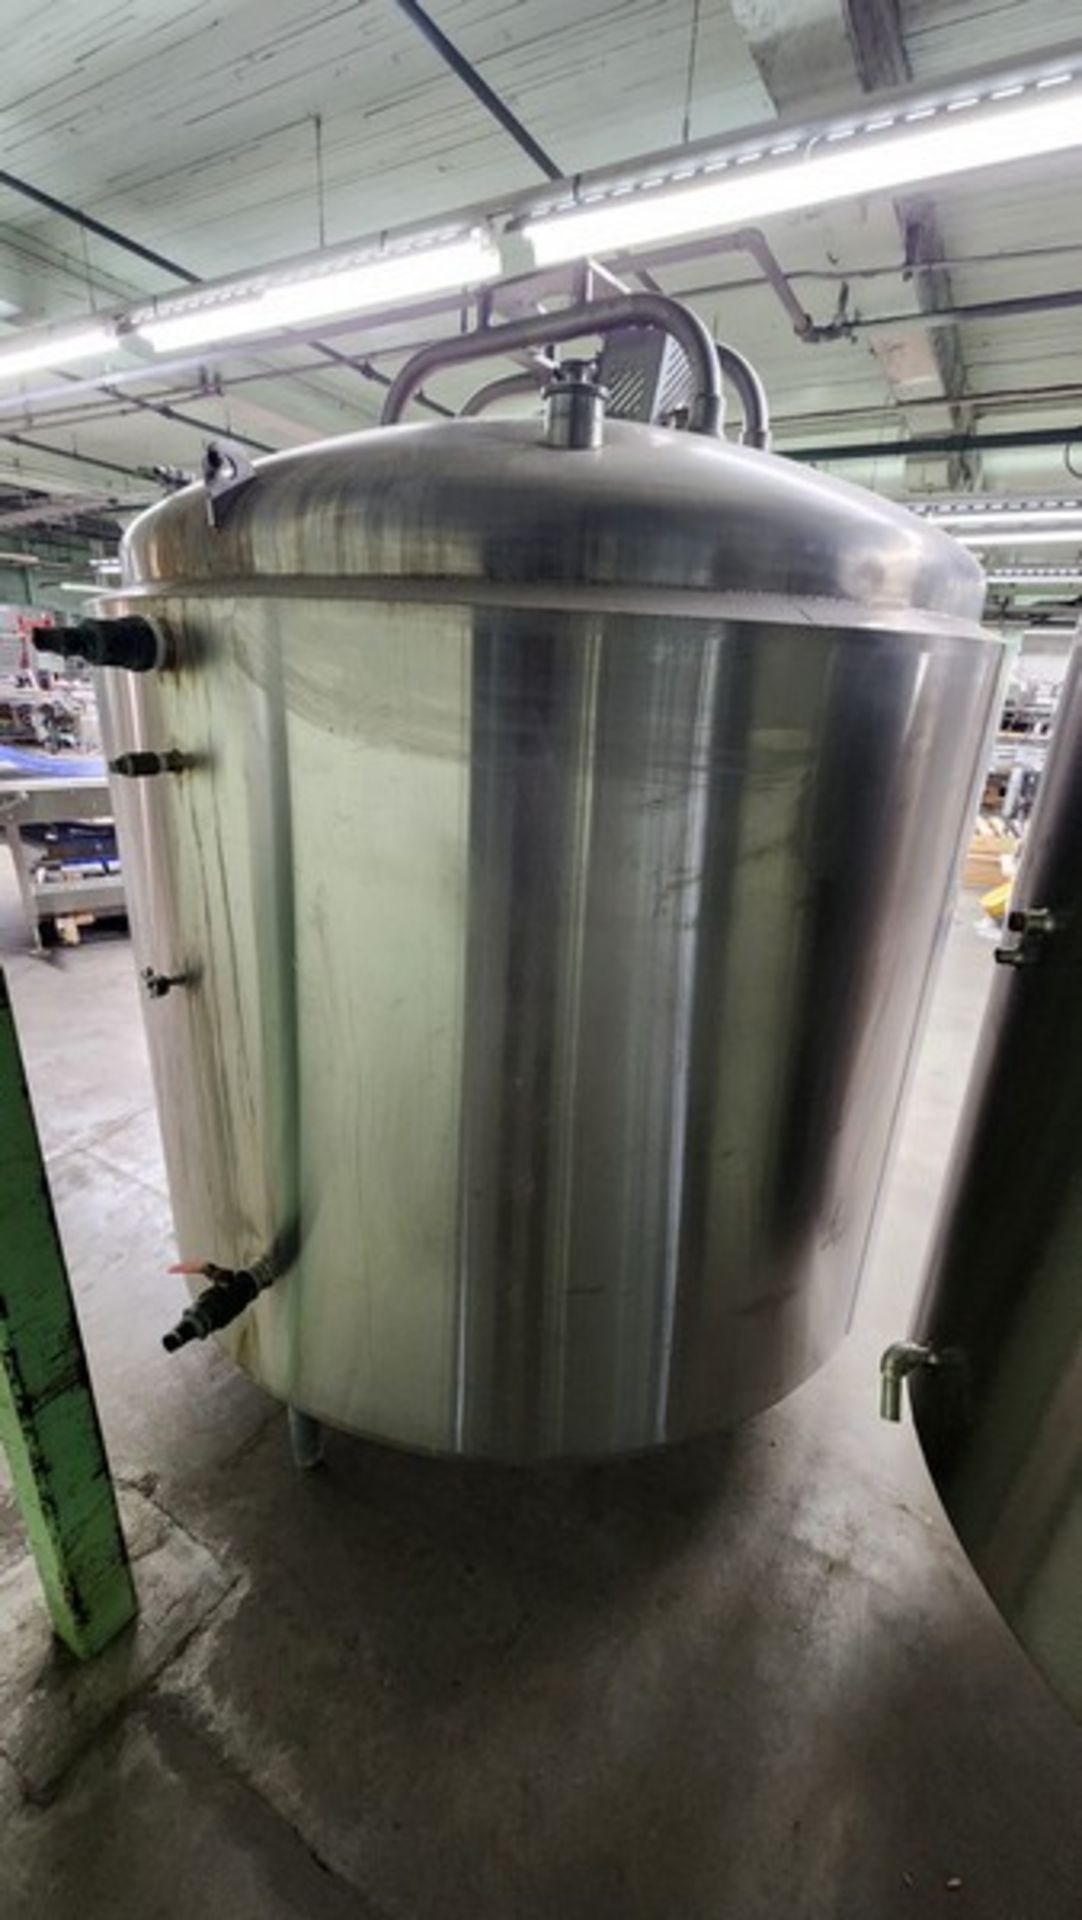 Cooling mixing tank 316 Stainless steel capacity of 750 usg motor\gearbox is missing (Item #102U) ( - Image 2 of 4